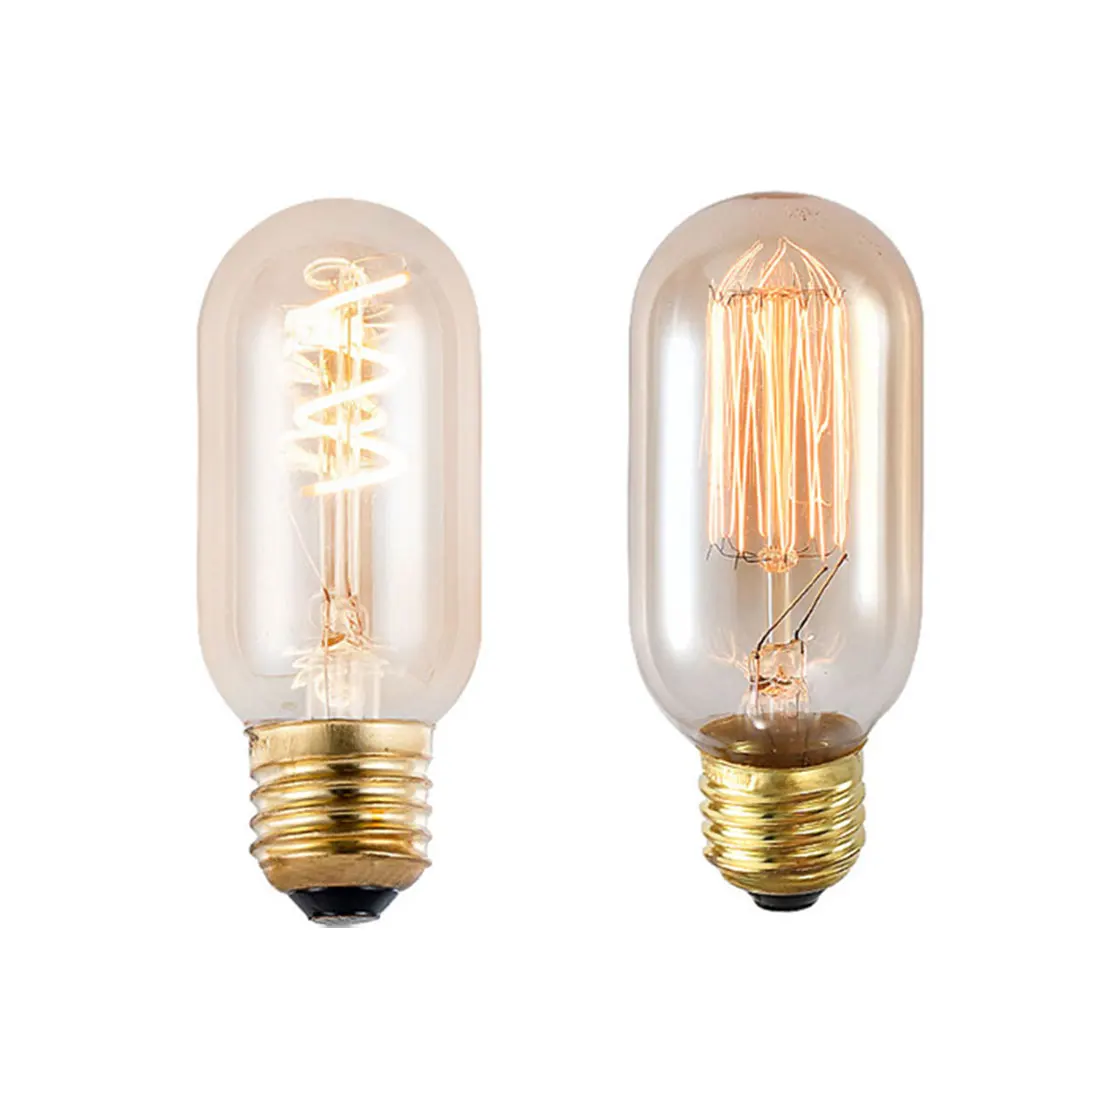 Vintage Style Led Filament Light Retro Bulbs for home bar Outdoor Free Shipping 